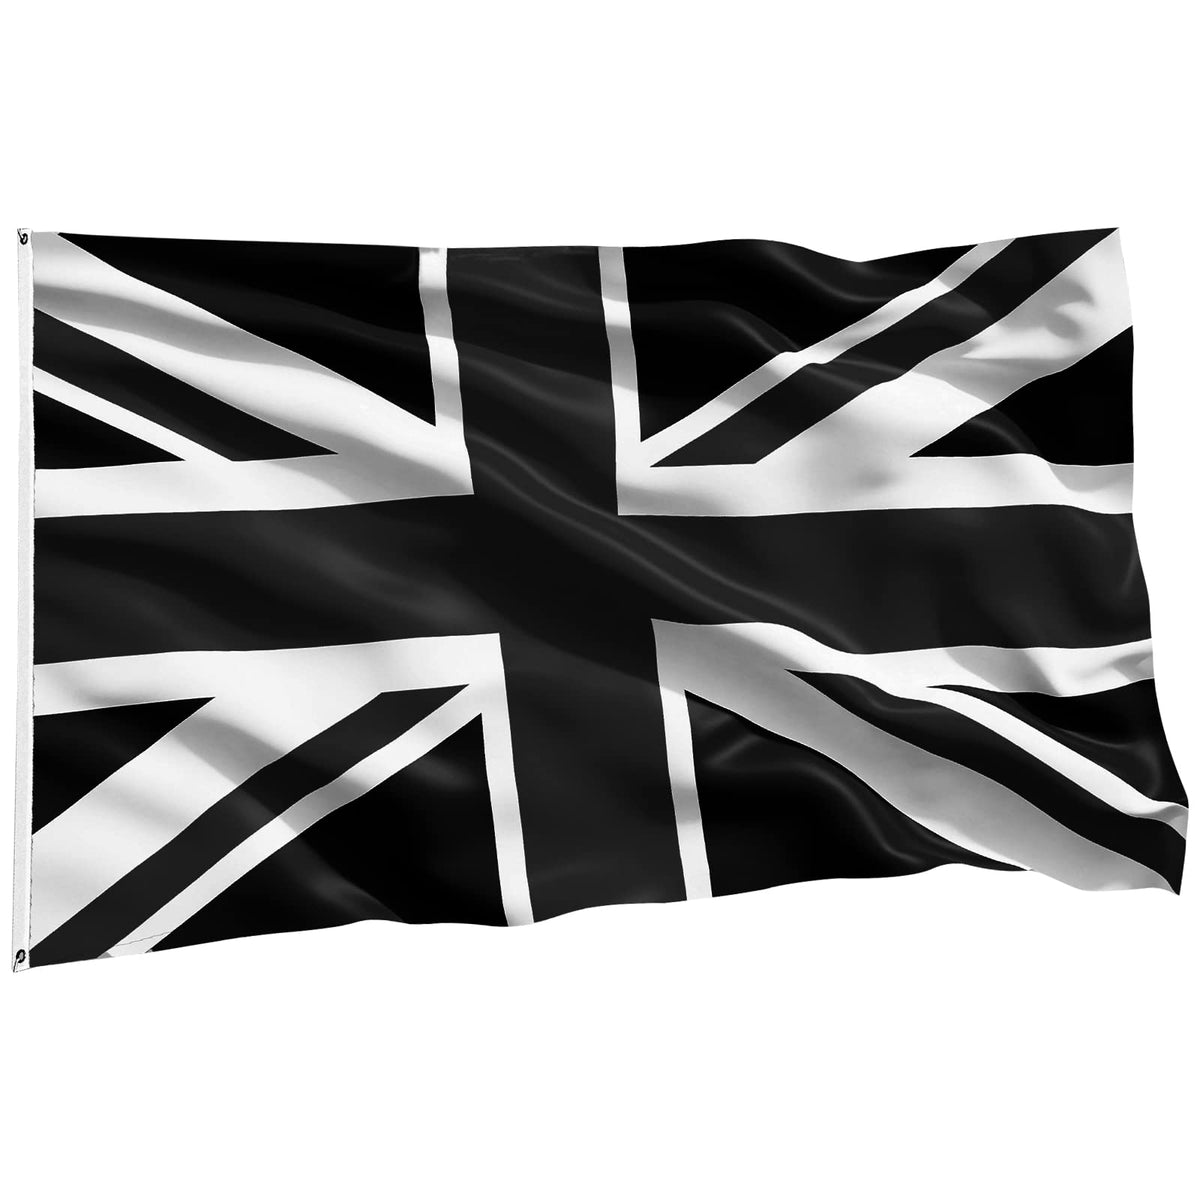 Black Union Jack Flag 5ft x 3ft, Tribute to Queen Elizabeth, Black and White Union Jack Flag for Parade, UV Fade Resistant British Flag with Eyelets